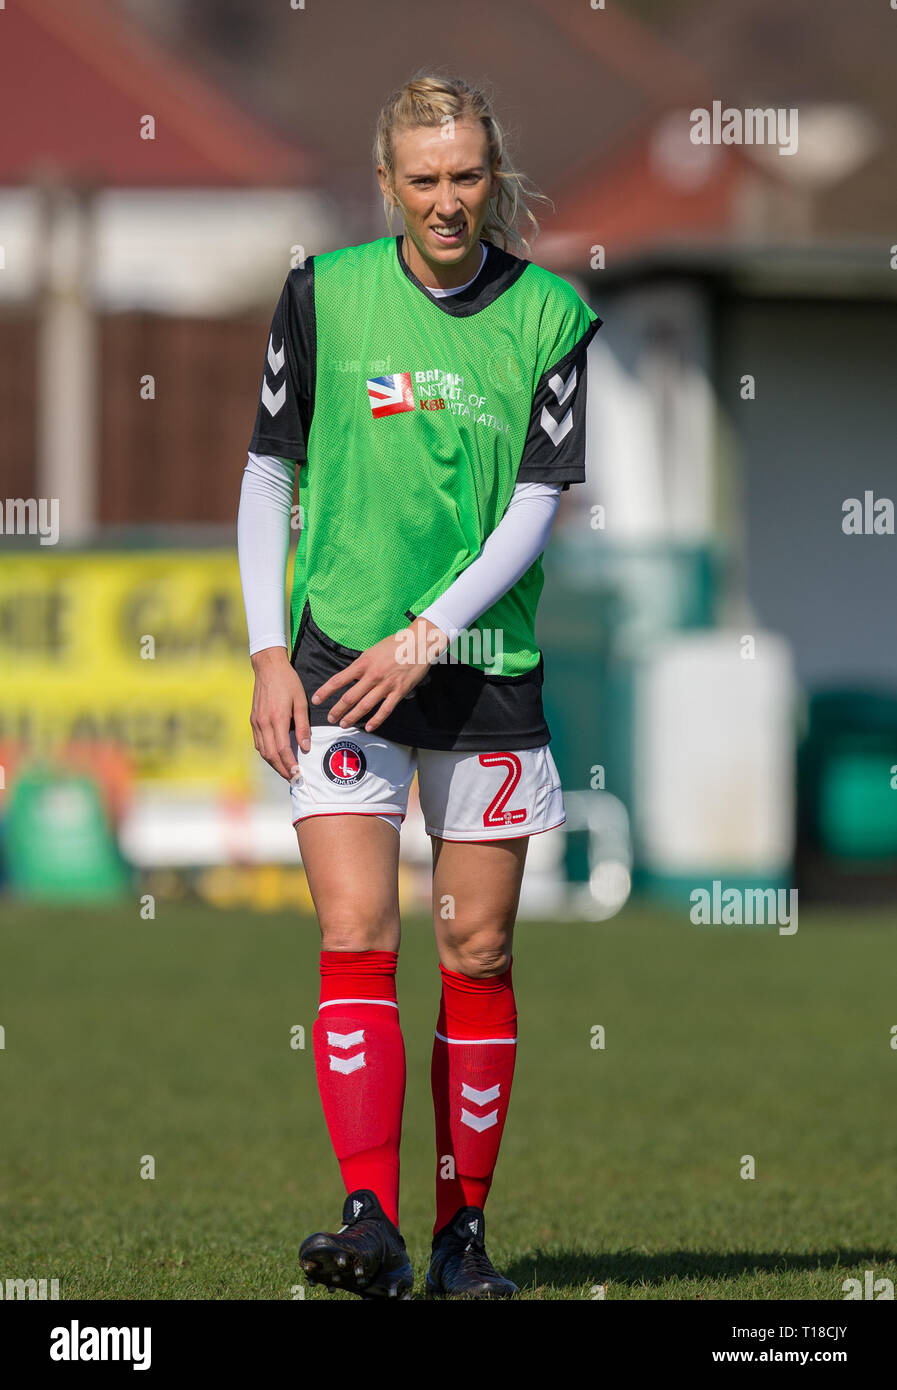 Dartford, Kent, UK. 24th March, 2019. Charlotte Kerr of Charlton Athletic during the FAWSL 2 match between Charlton Athletic Women and Manchester United Women at Oakwood, Old Rd, Crayford, Dartford, Kent, DA1 4DN on 24 March 2019. Photo by Andy Rowland. Credit: Andrew Rowland/Alamy Live News Stock Photo